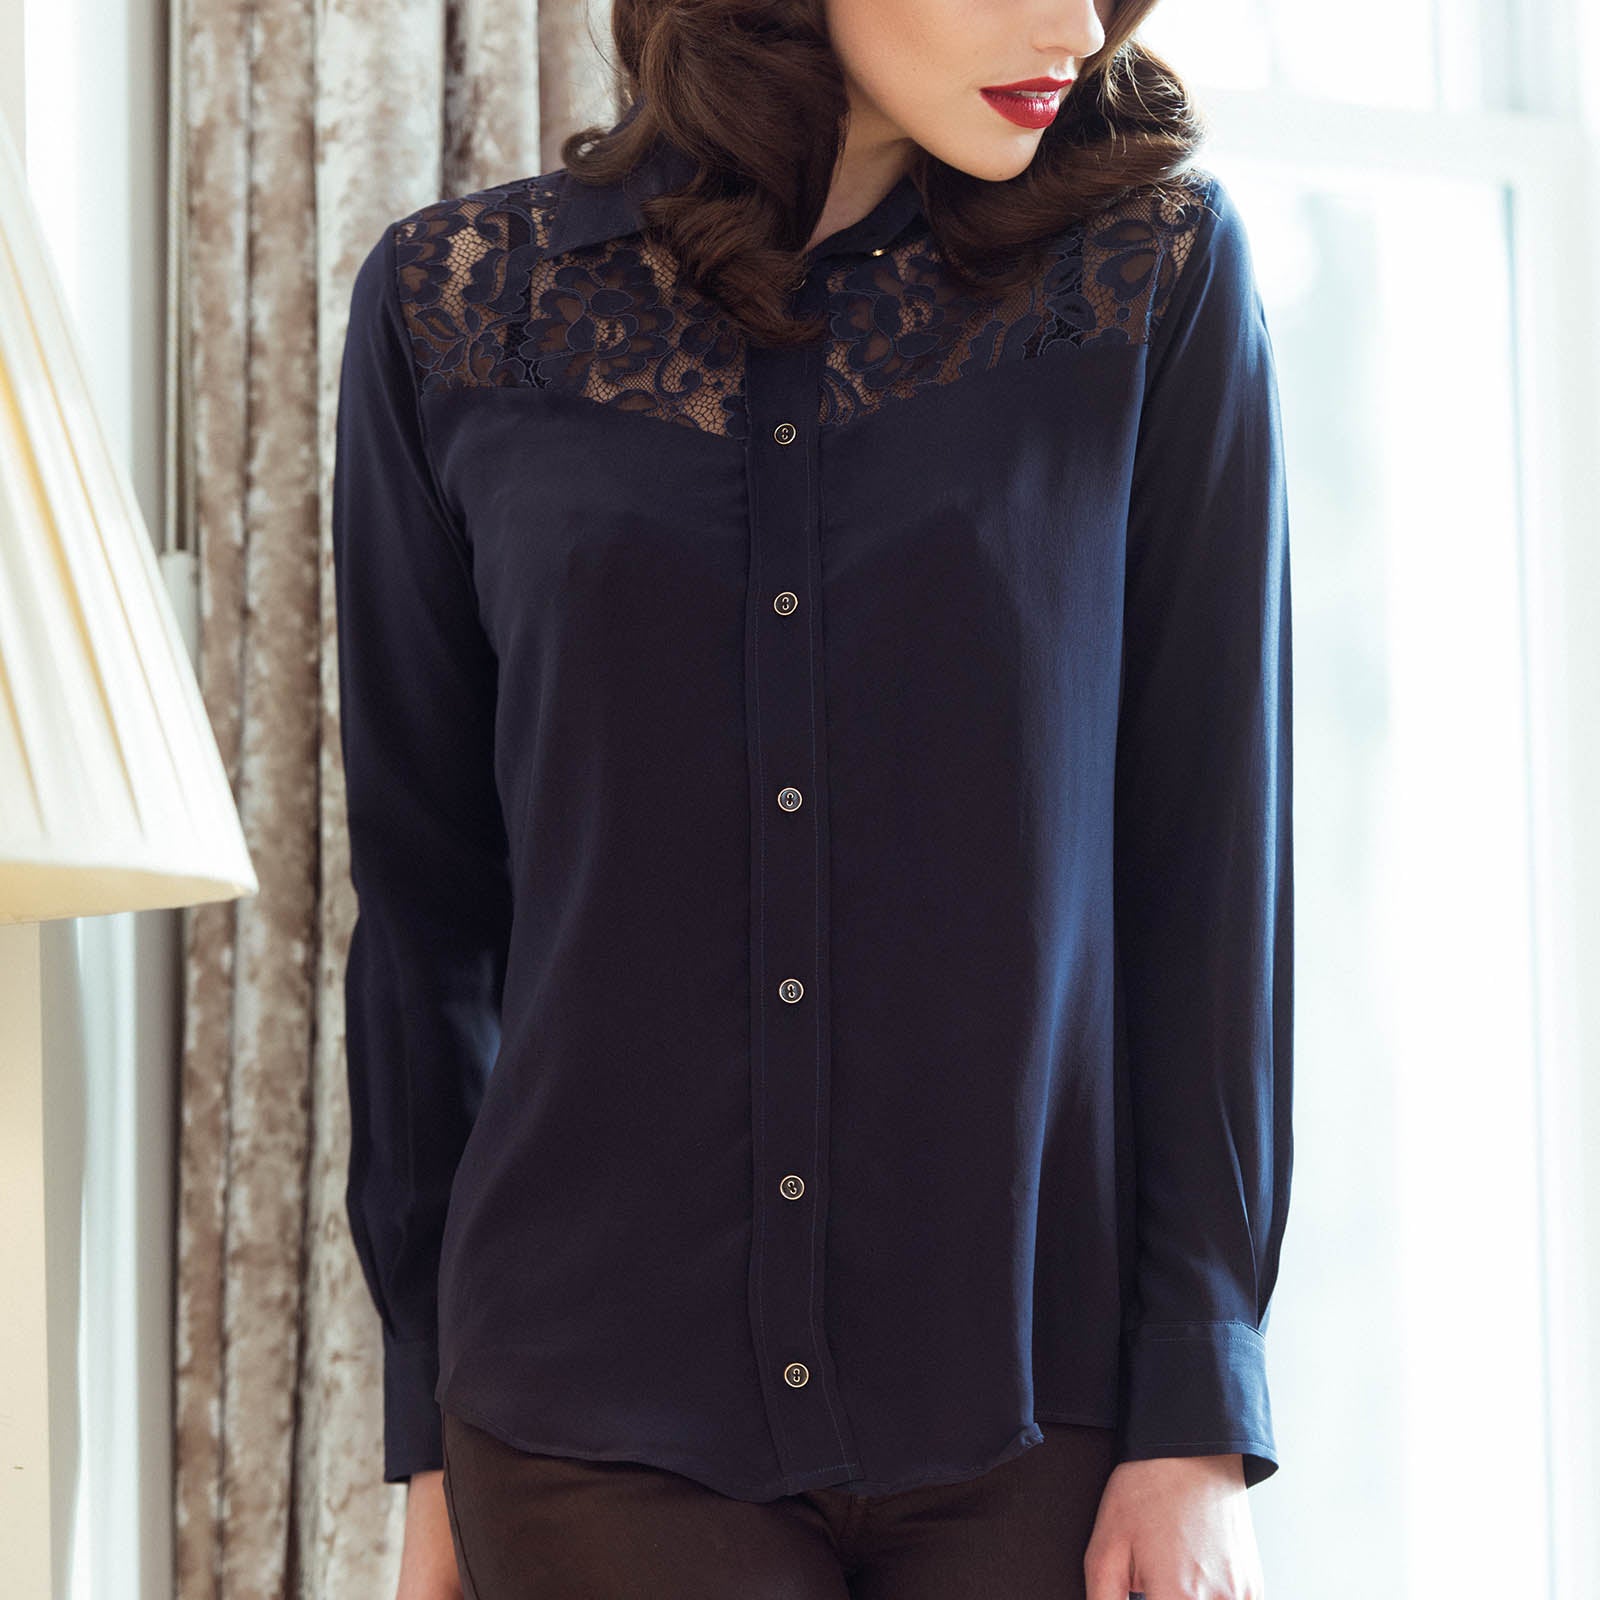 Women's navy blue silk shirt with lace detail